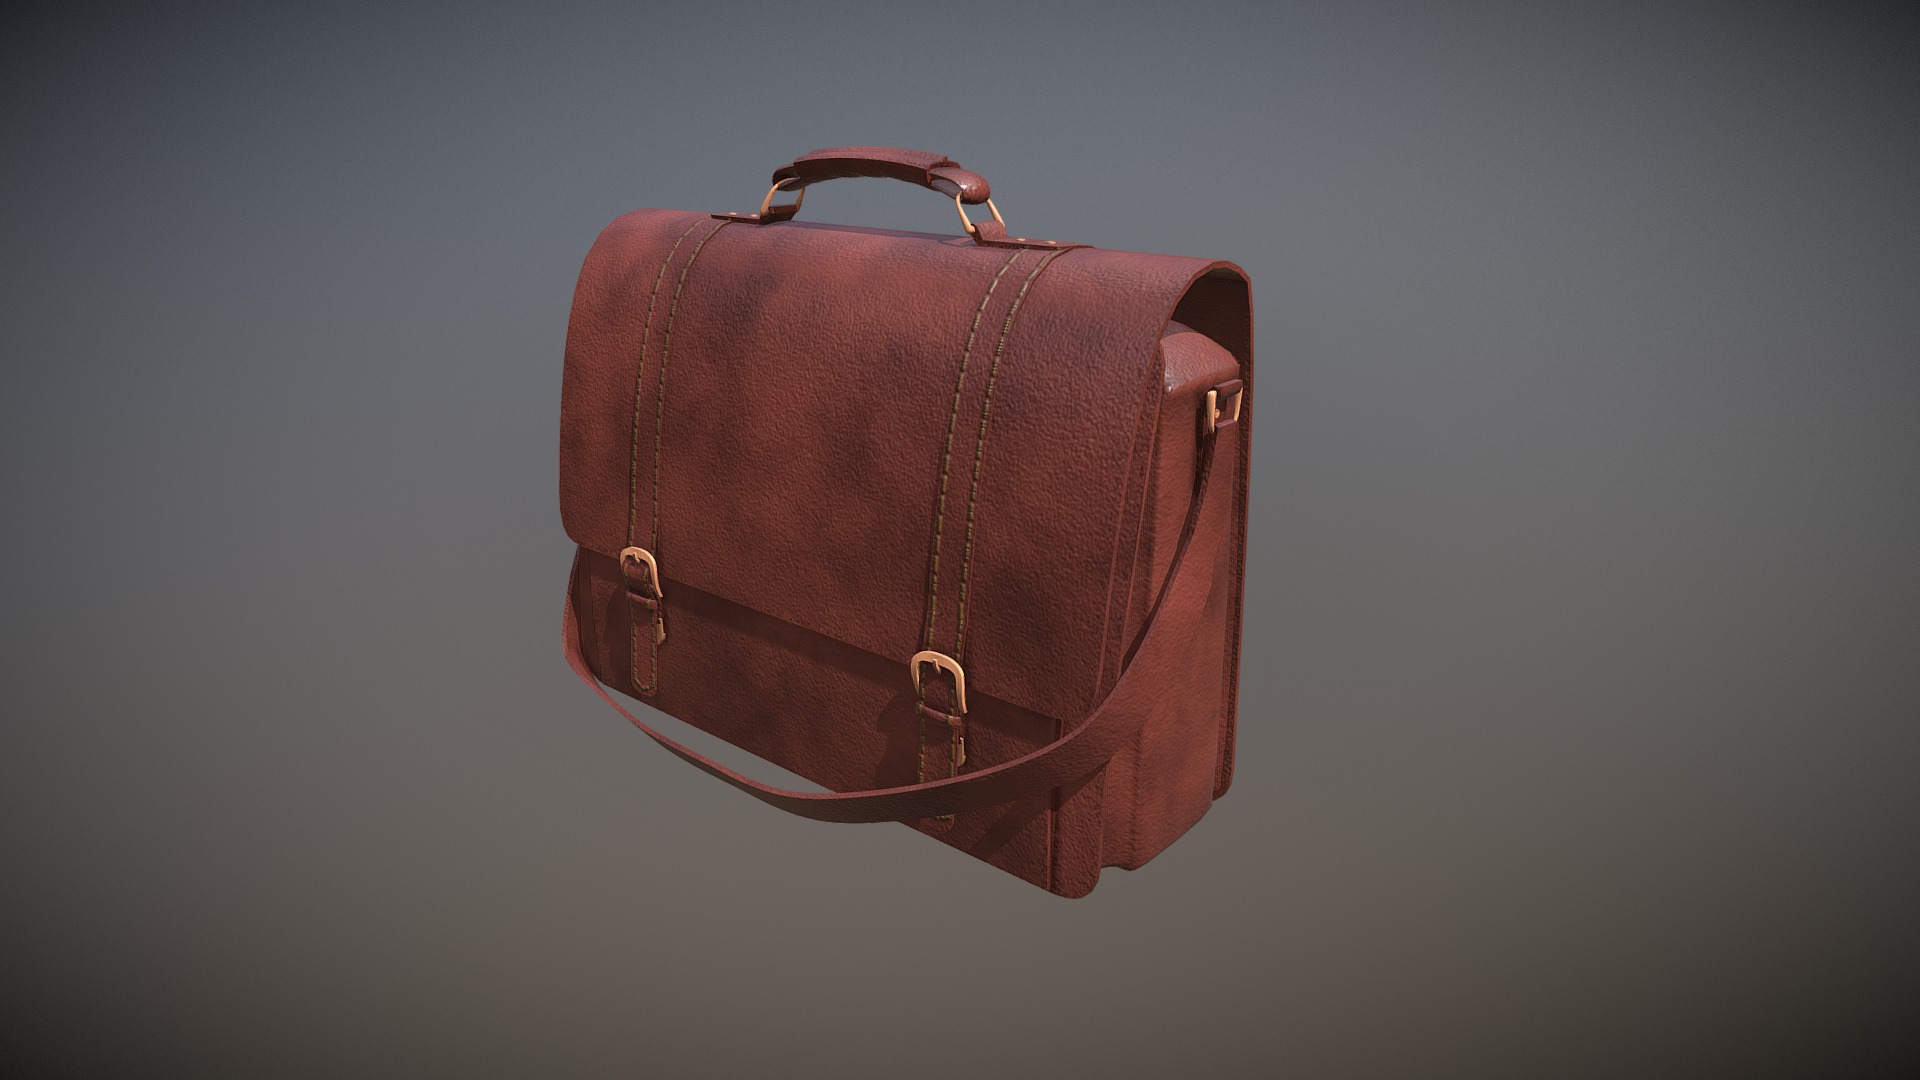 3D model leather bag - This is a 3D model of the leather bag. The 3D model is about a brown leather purse.